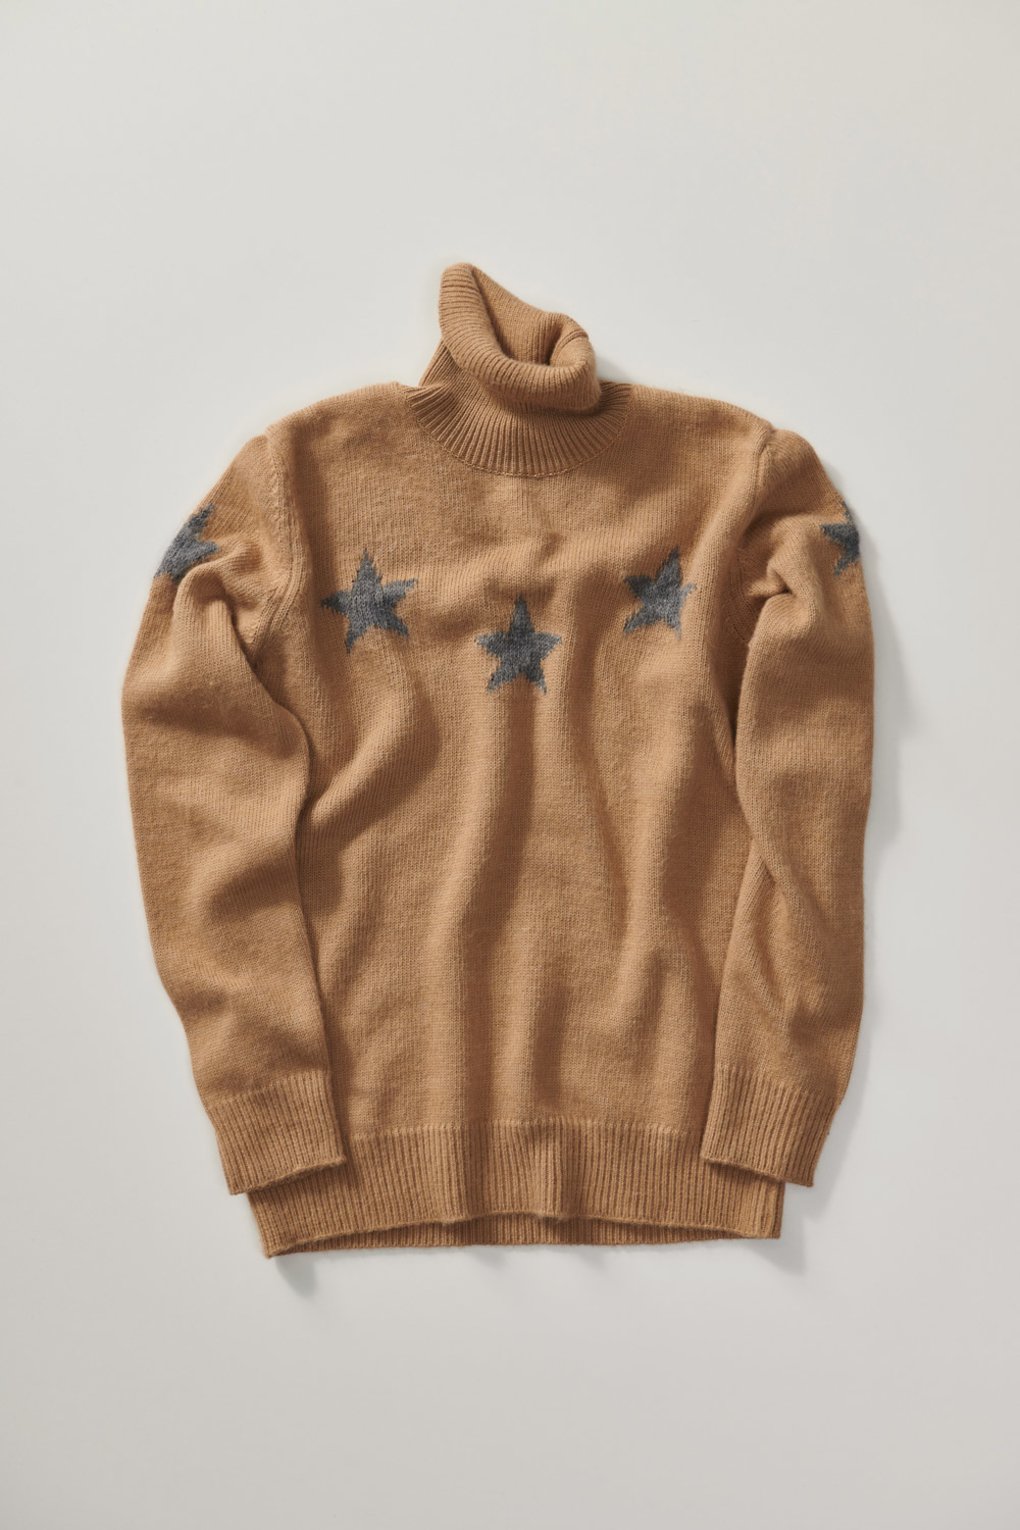 Turtleneck sweater with stars